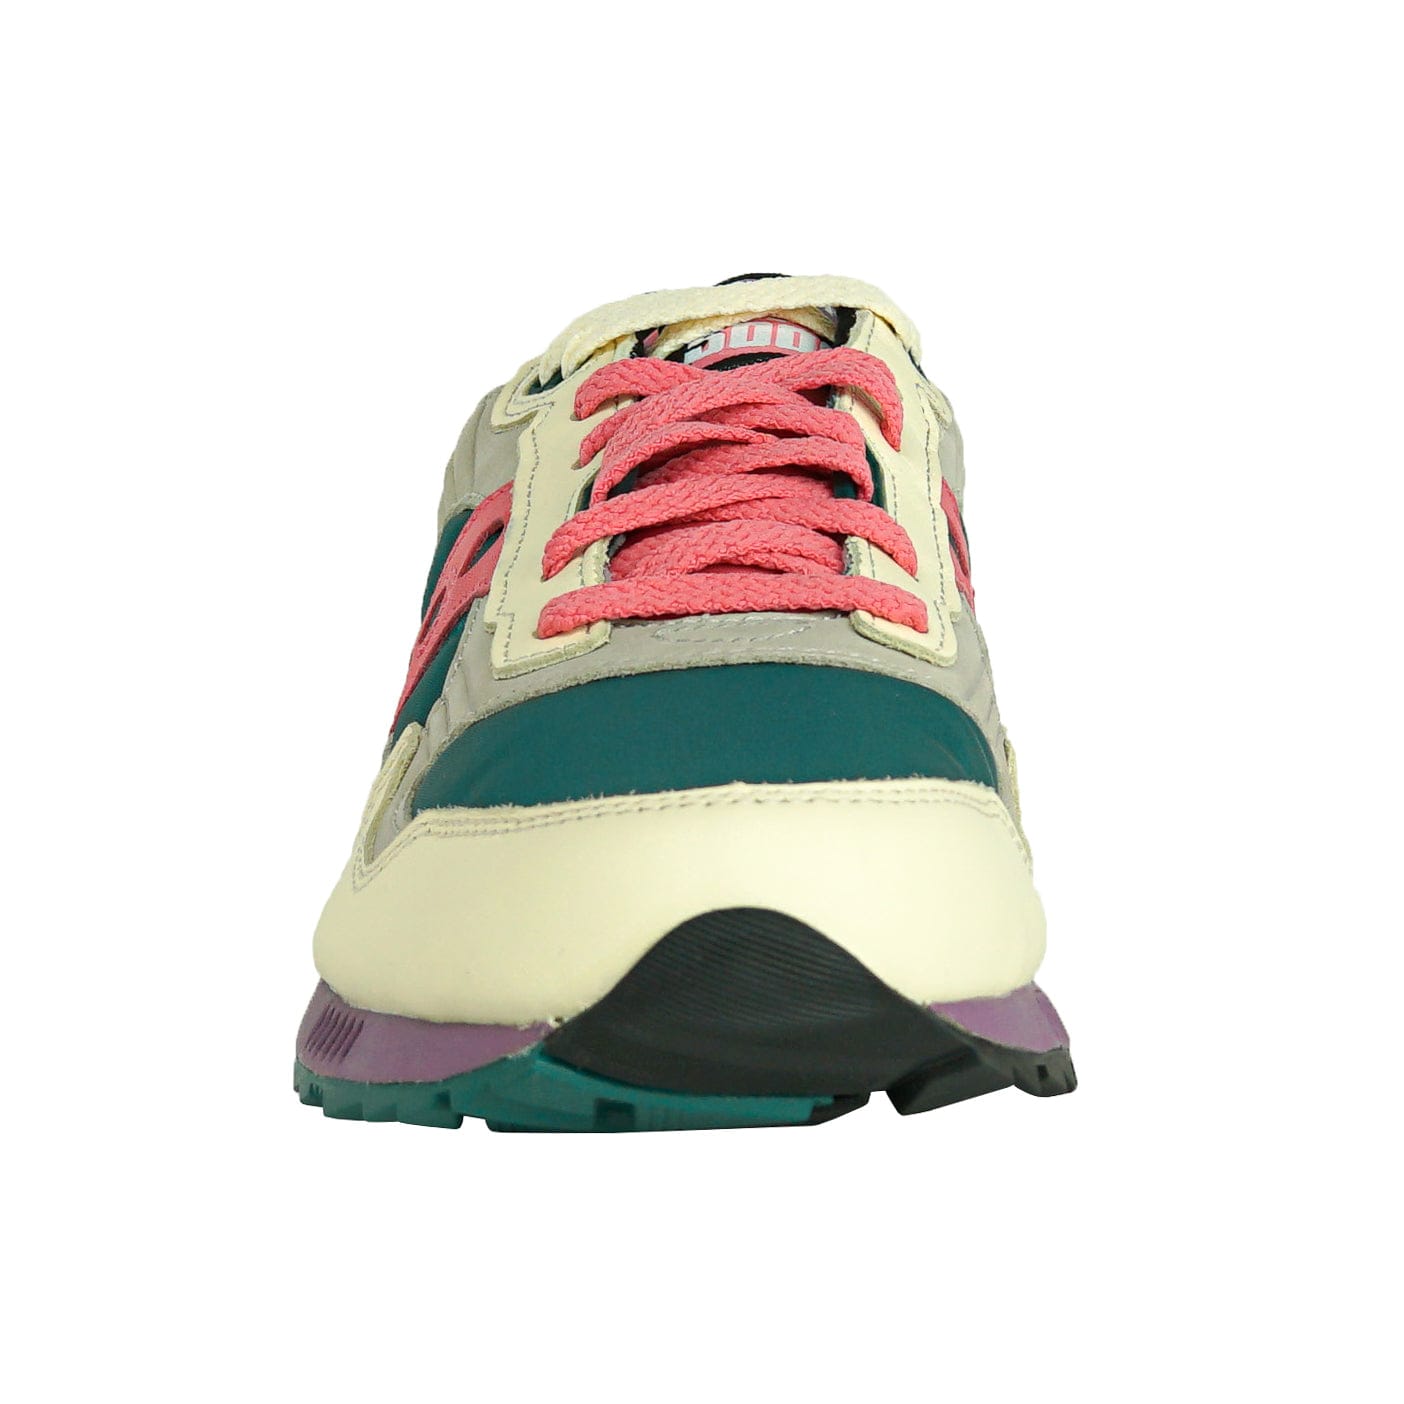 Shadow 5000 in yellow and green - Saucony - State Of Flux